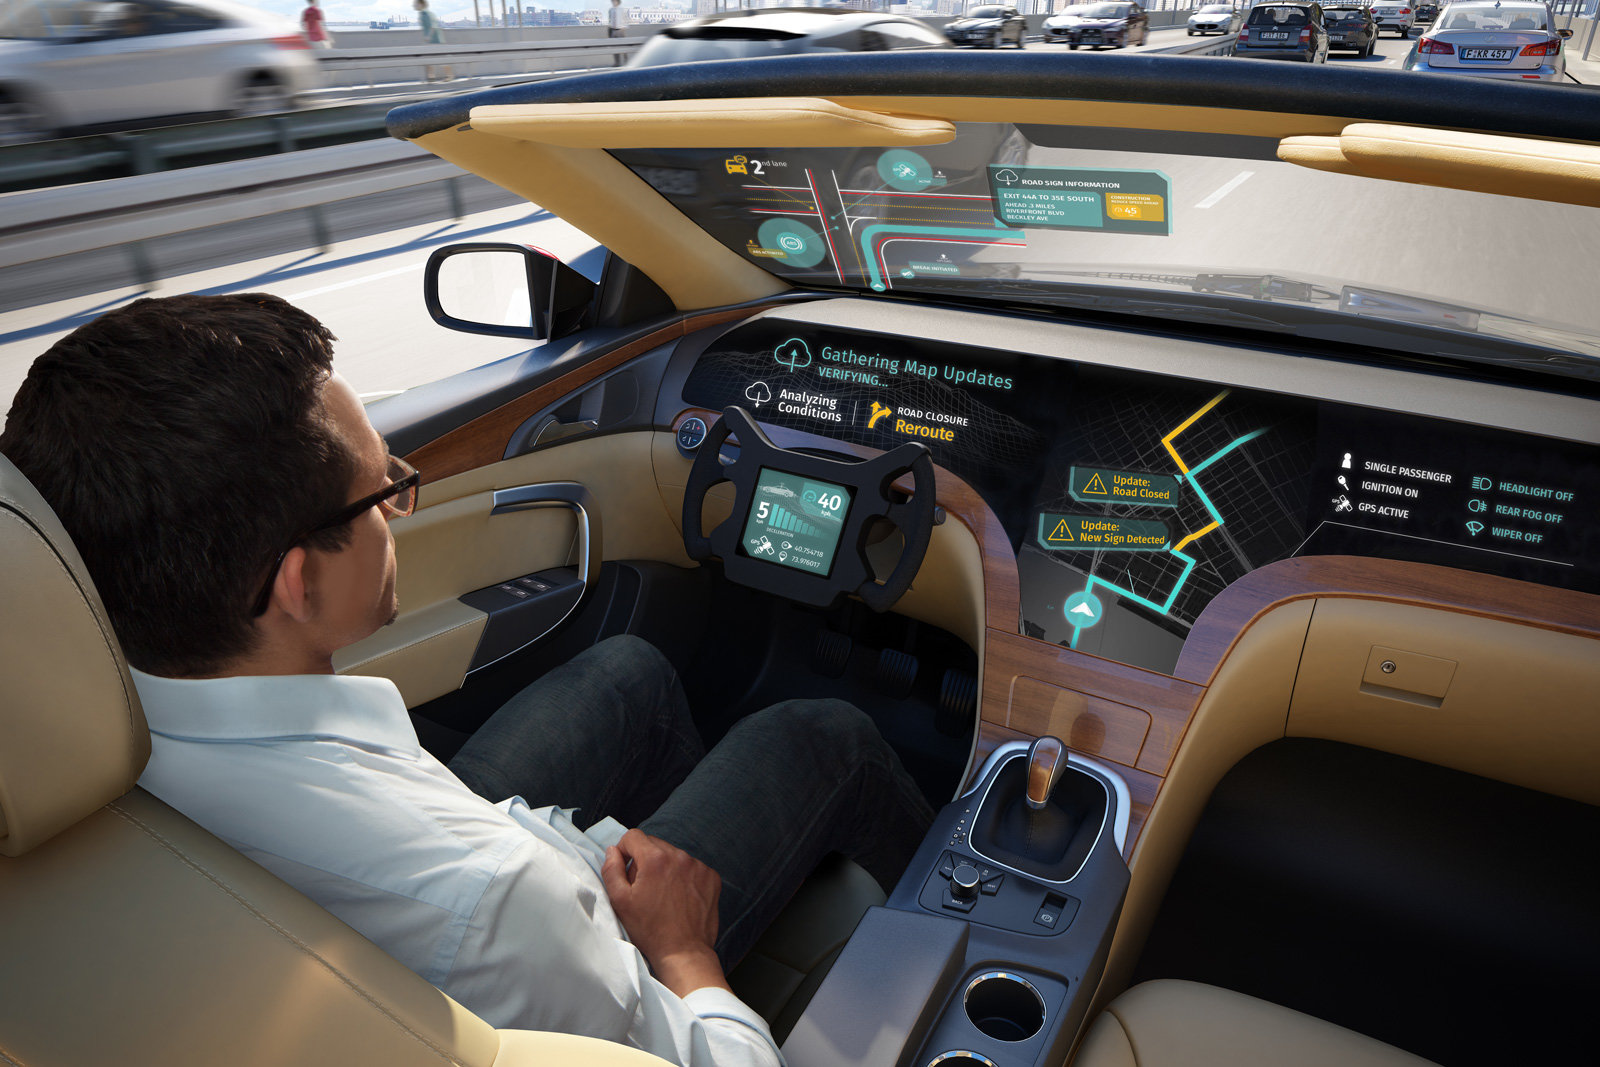 LG is working on futuristic selfdriving AI cars and it will be "safer